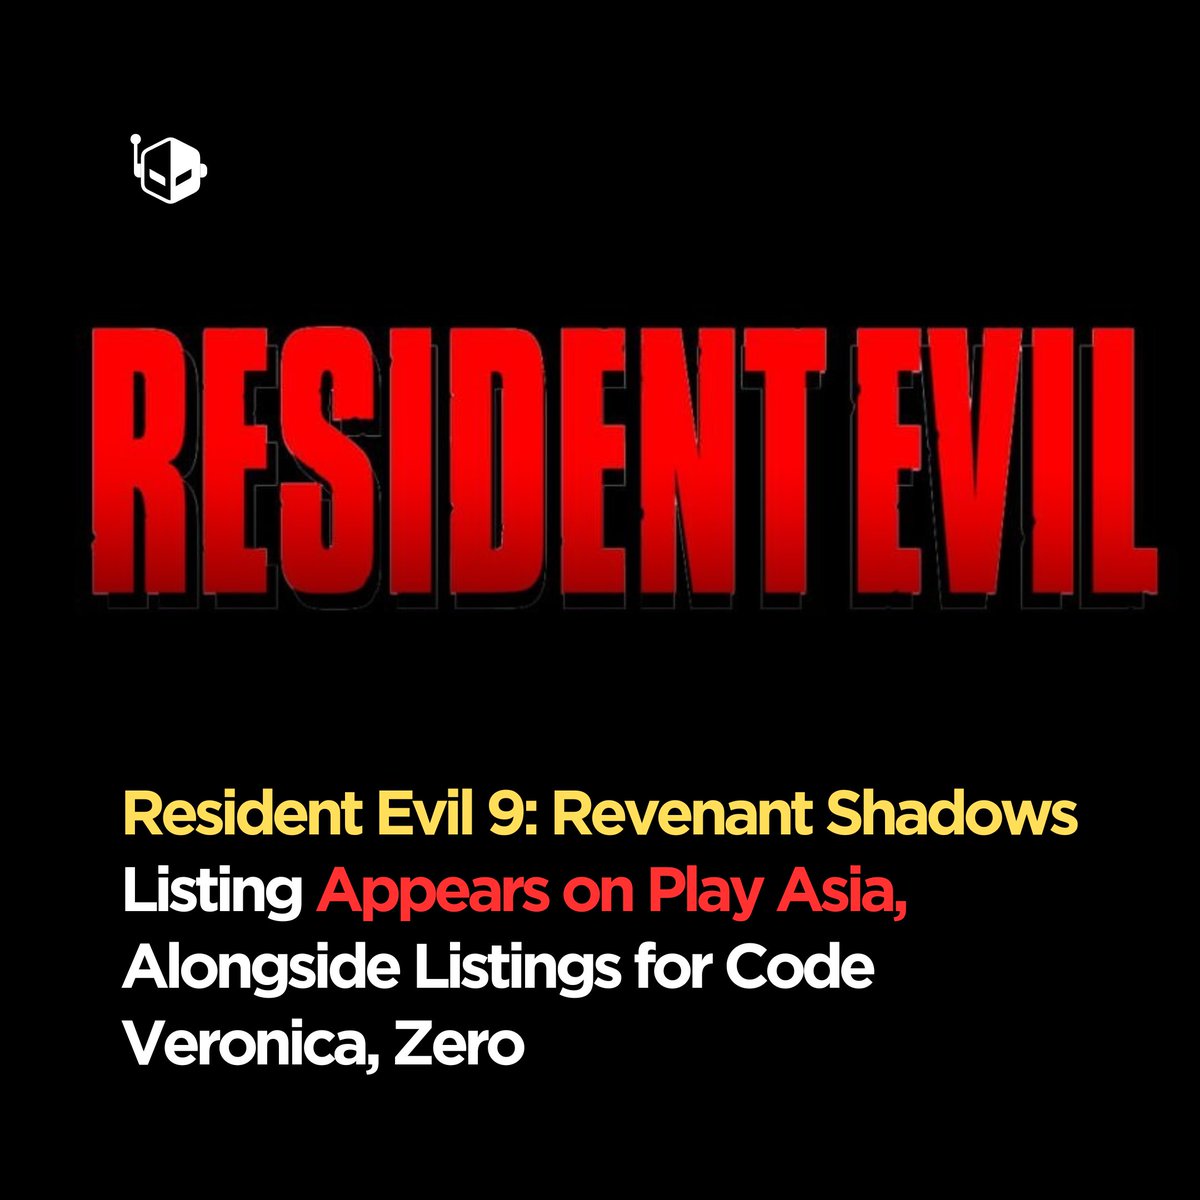 Resident Evil 9: Revenant Shadows listed on Play Asia, along with Code Veronica, Zero, and 5 for PS5. New stories, characters, and remakes are coming.